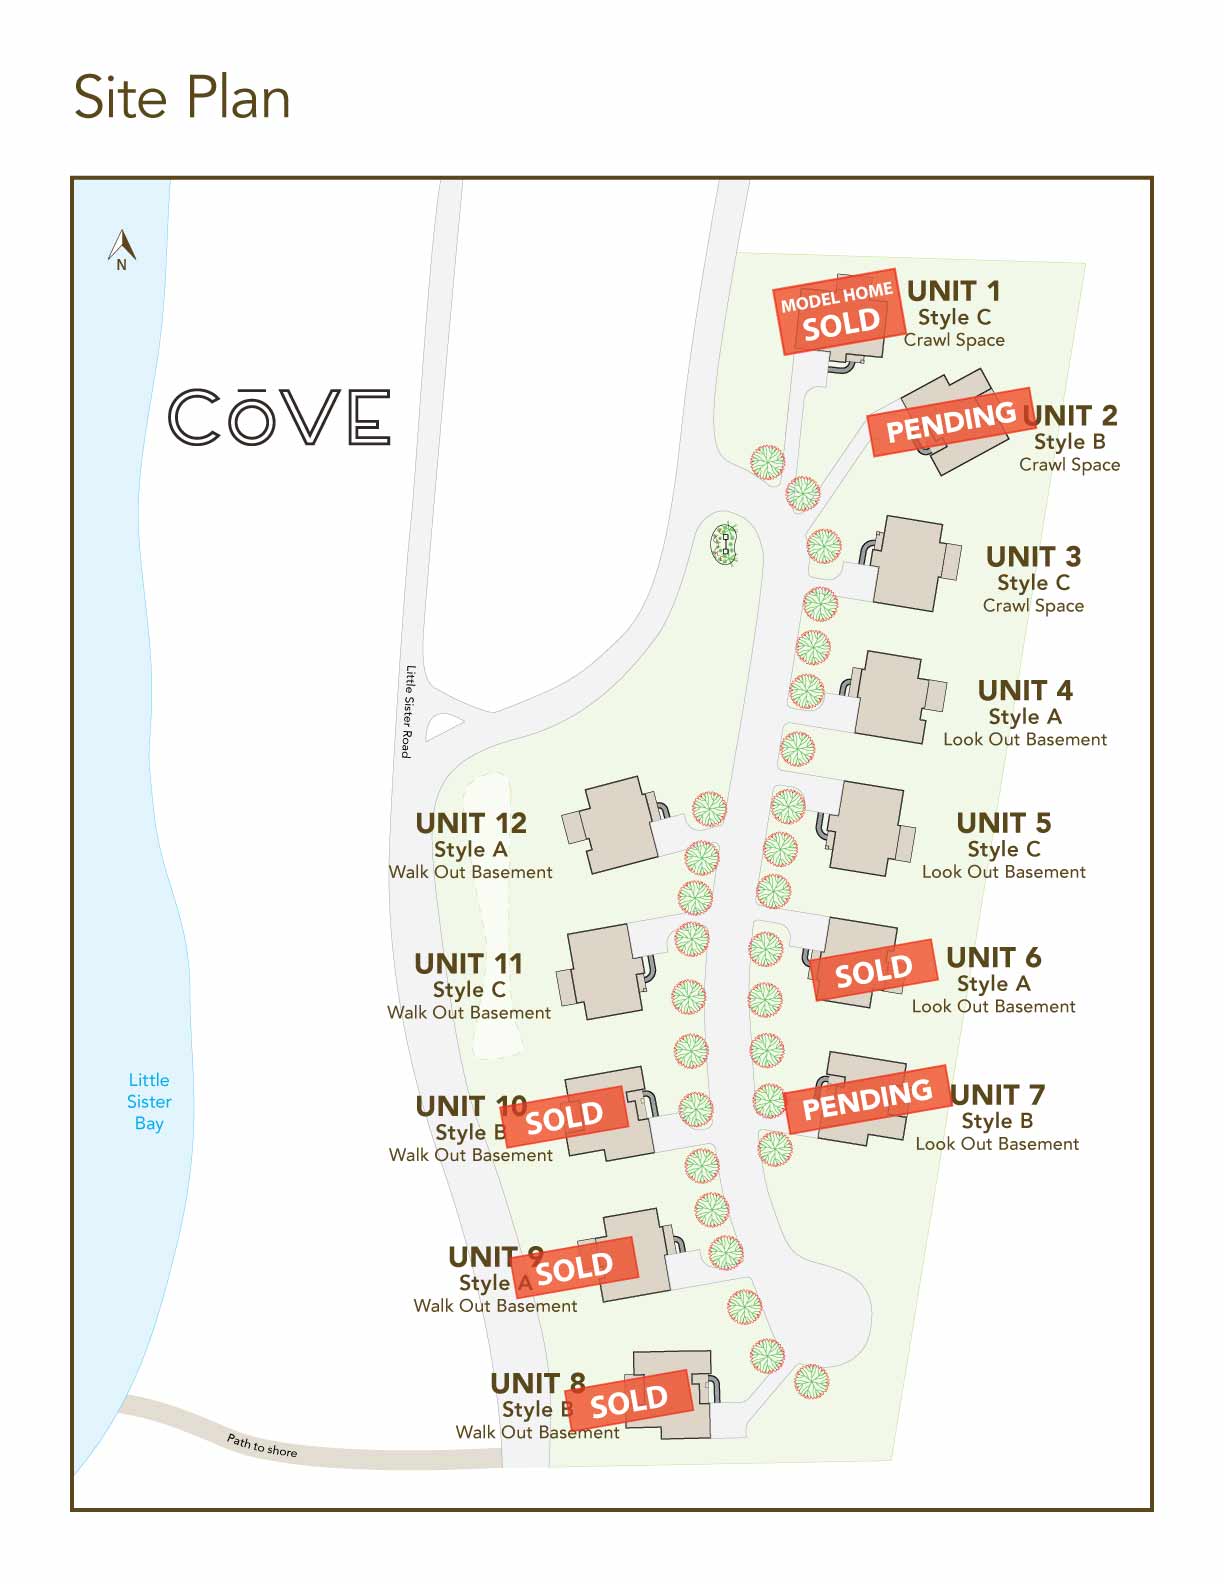 The Cove Site Plan